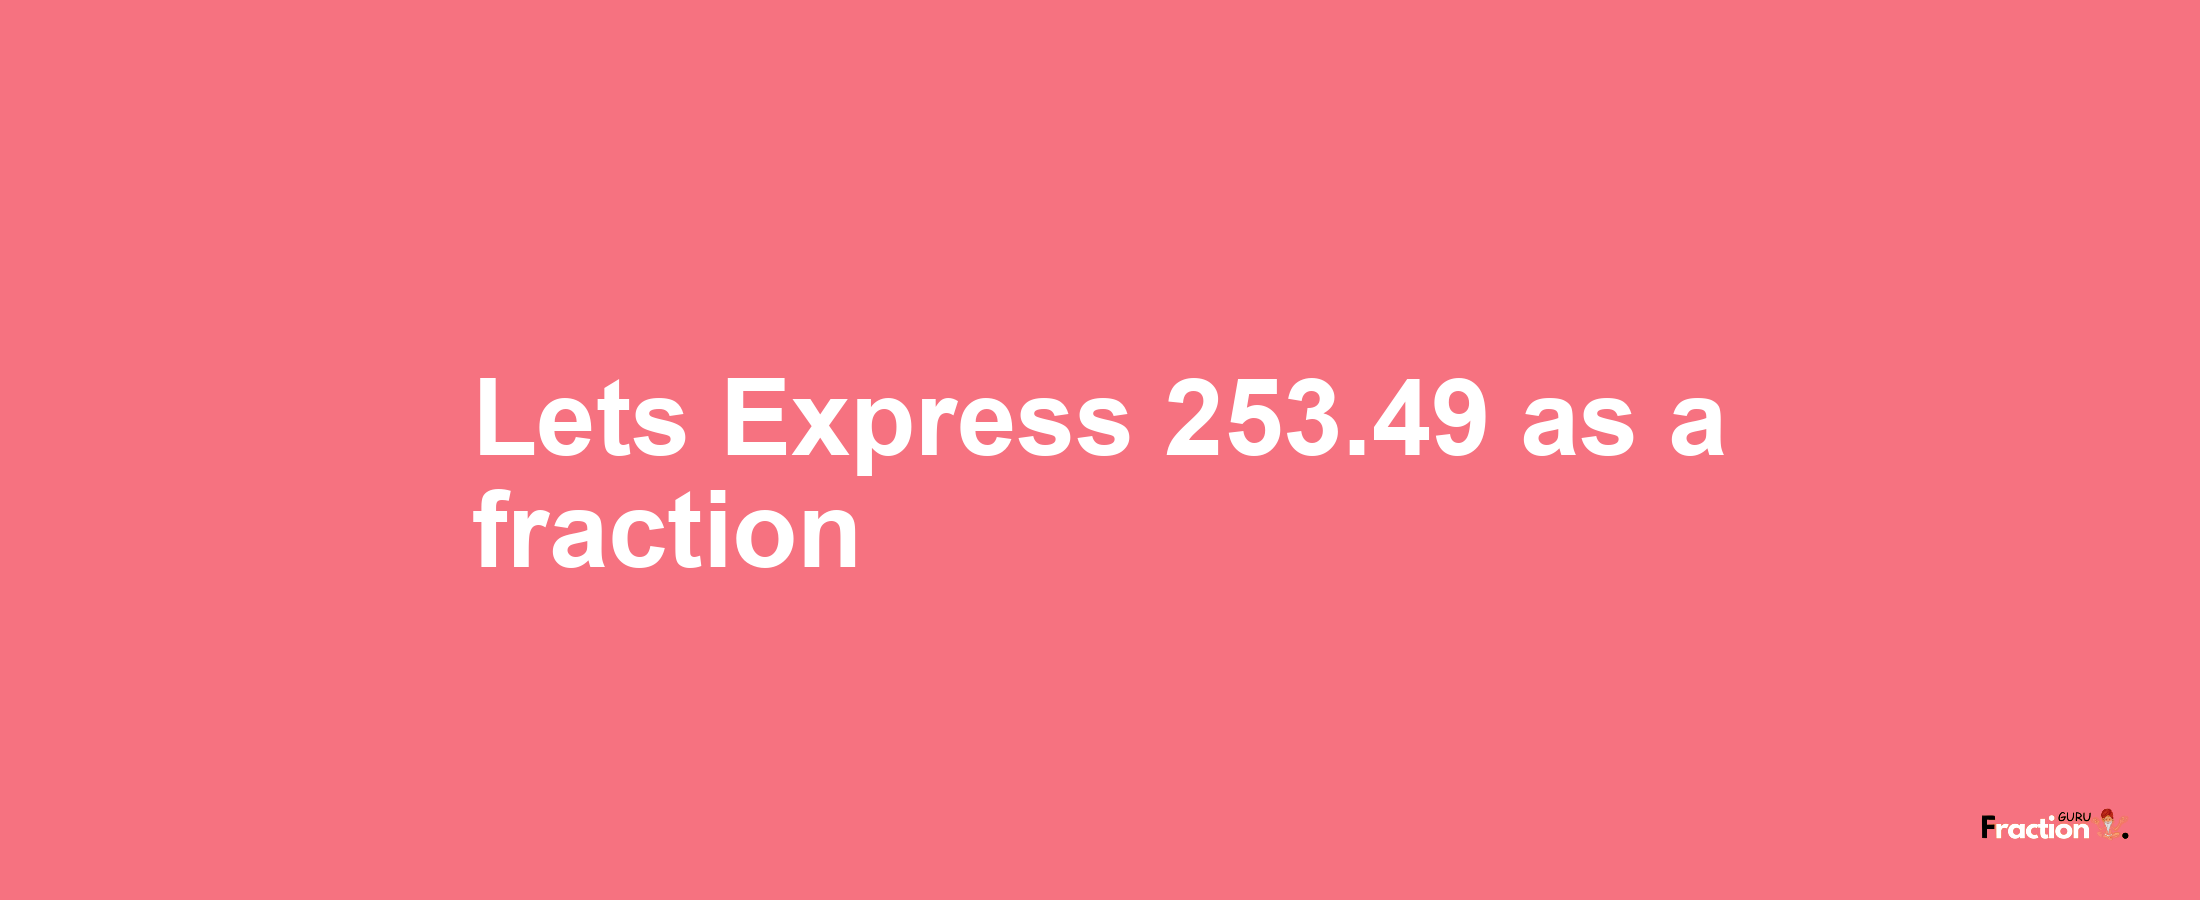 Lets Express 253.49 as afraction